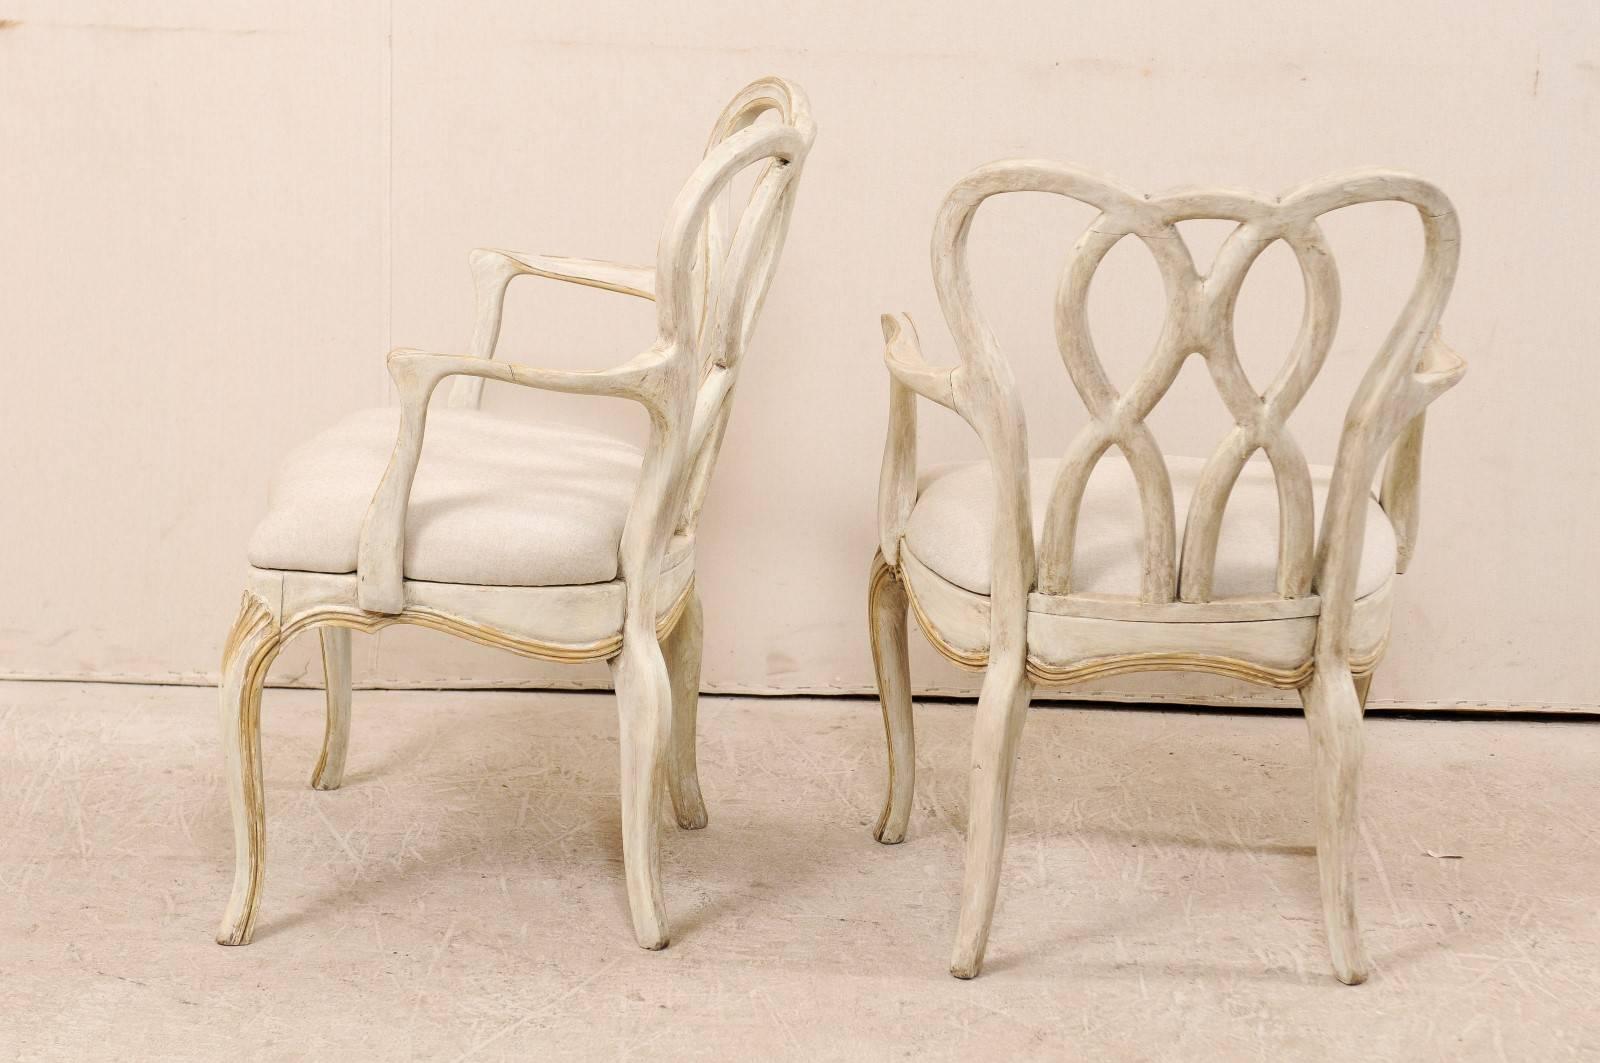 Pair of Venetian Style Painted Wood Armchairs with Intertwined Back-Splats 1